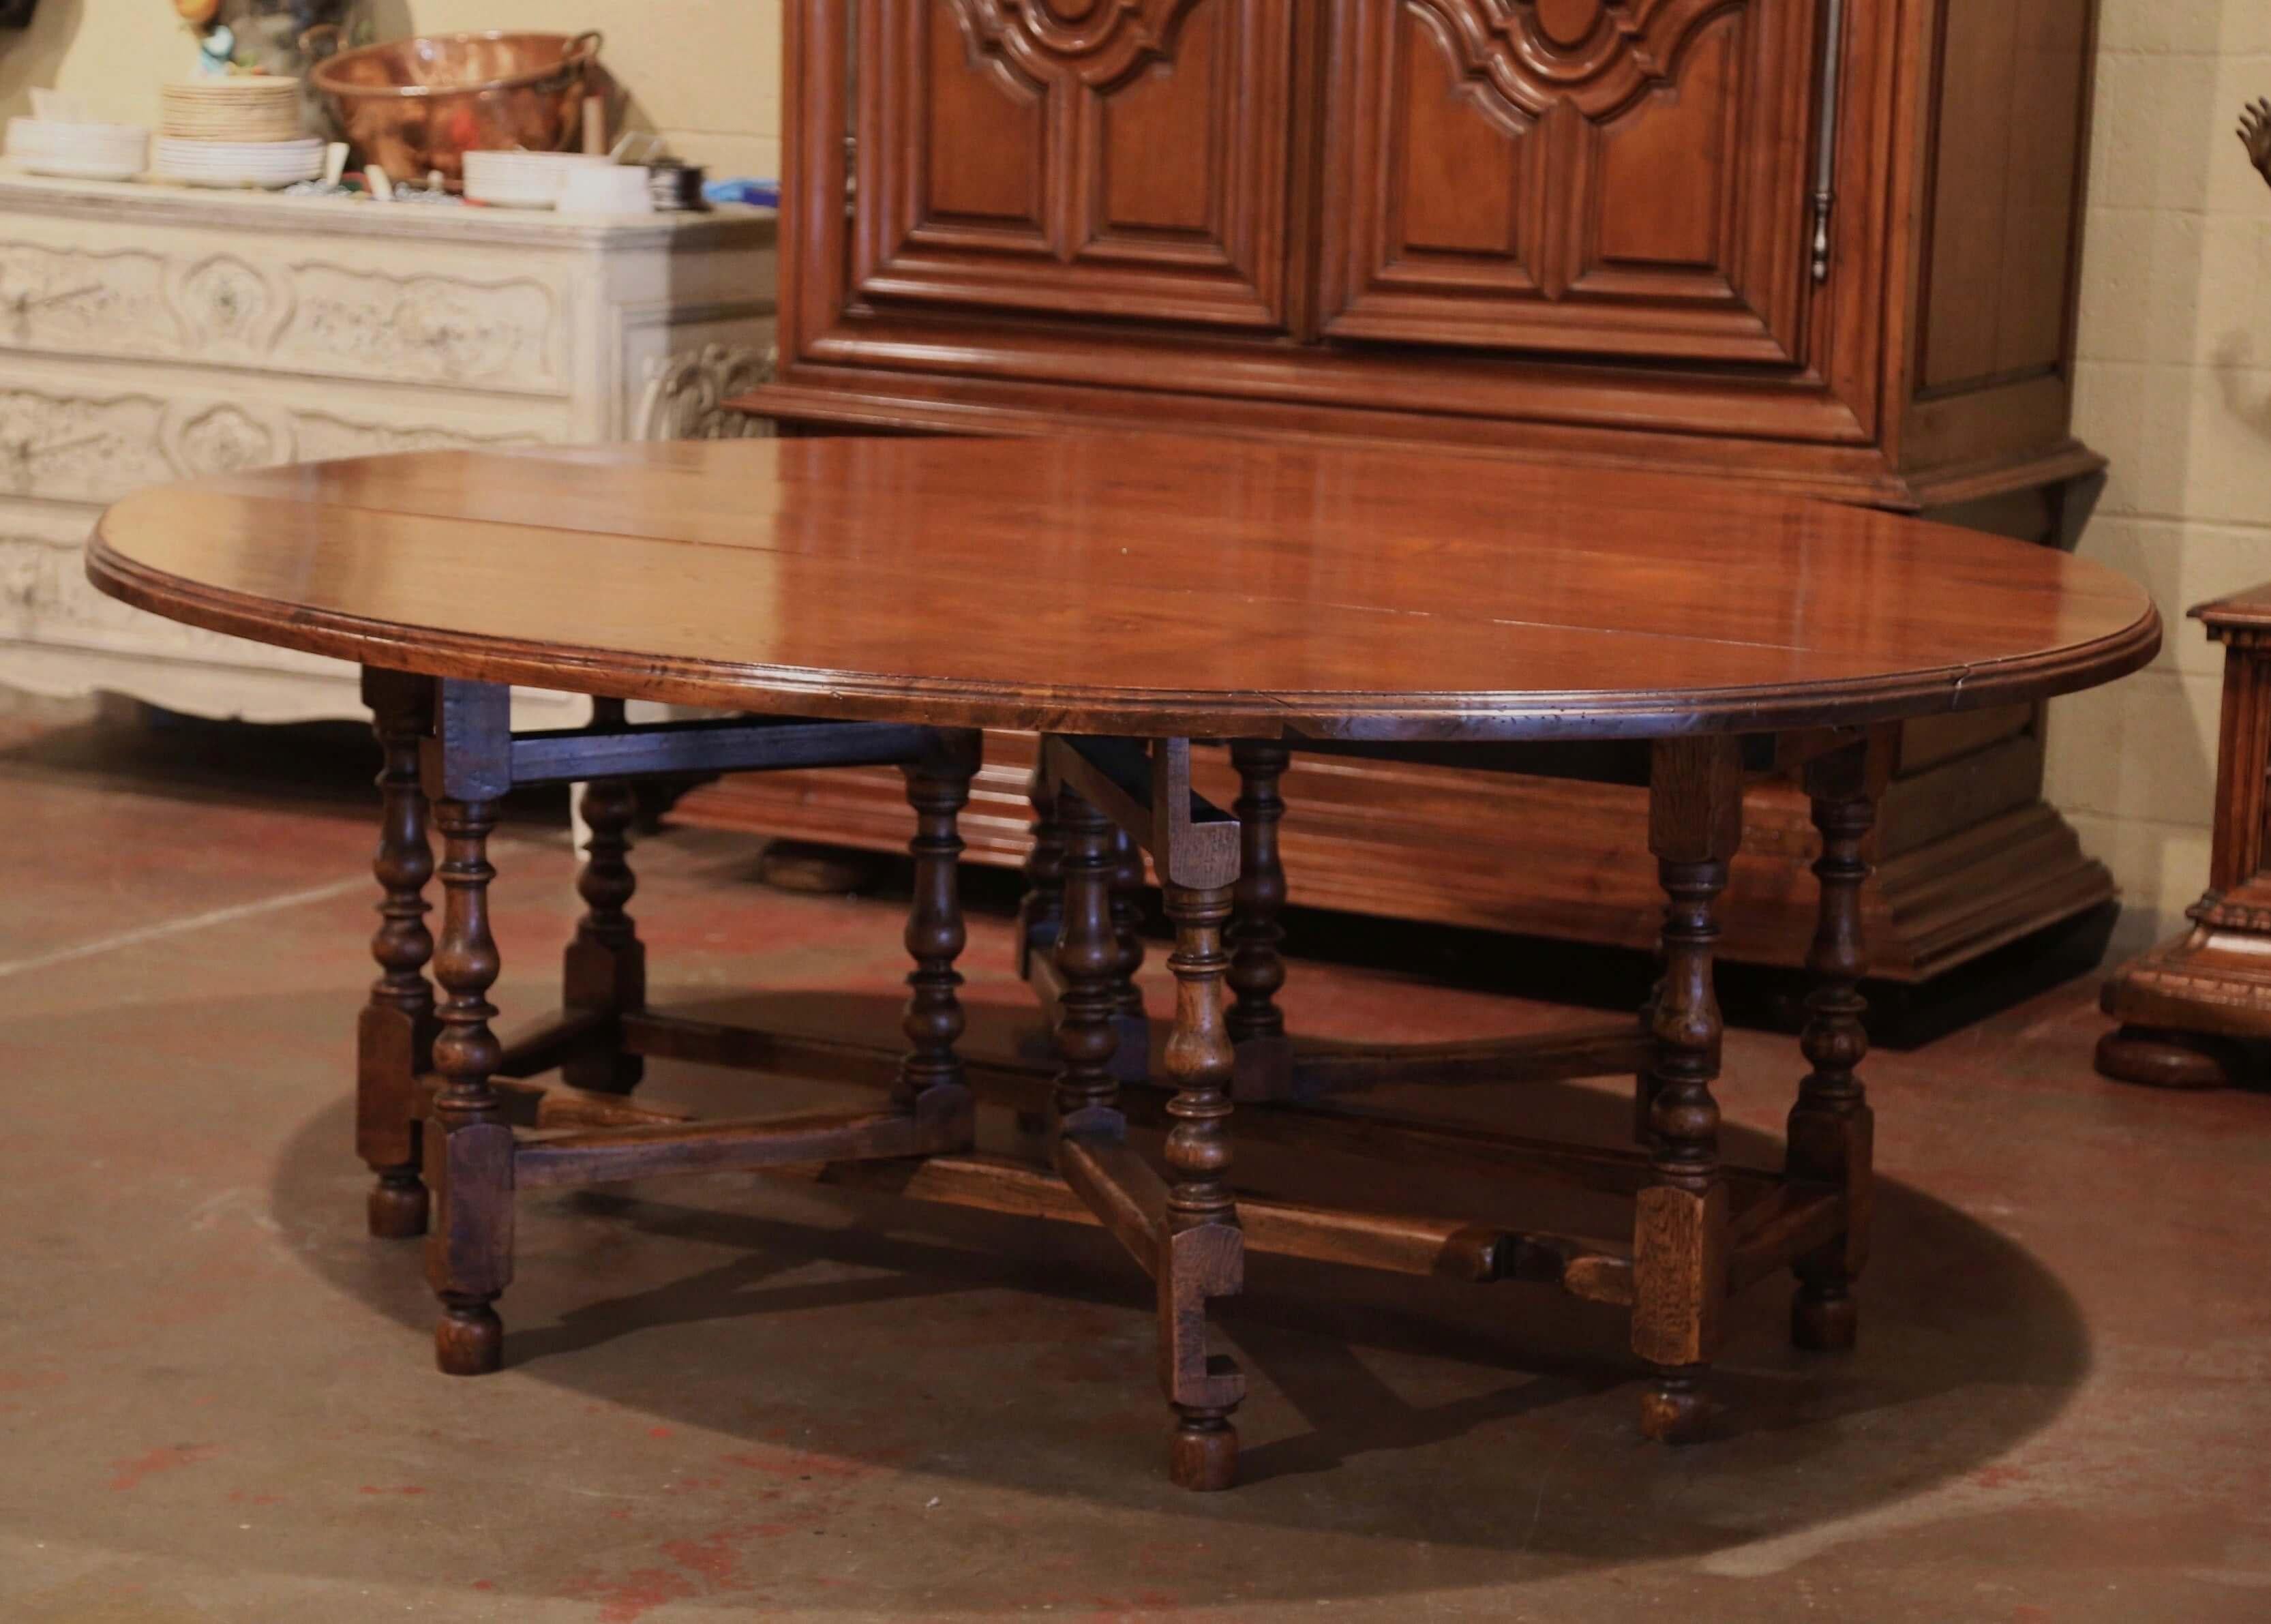 Midcentury English Carved Chestnut Eight Gate-Leg Drop-Leaf Oval Table (Louis XIII.) im Angebot